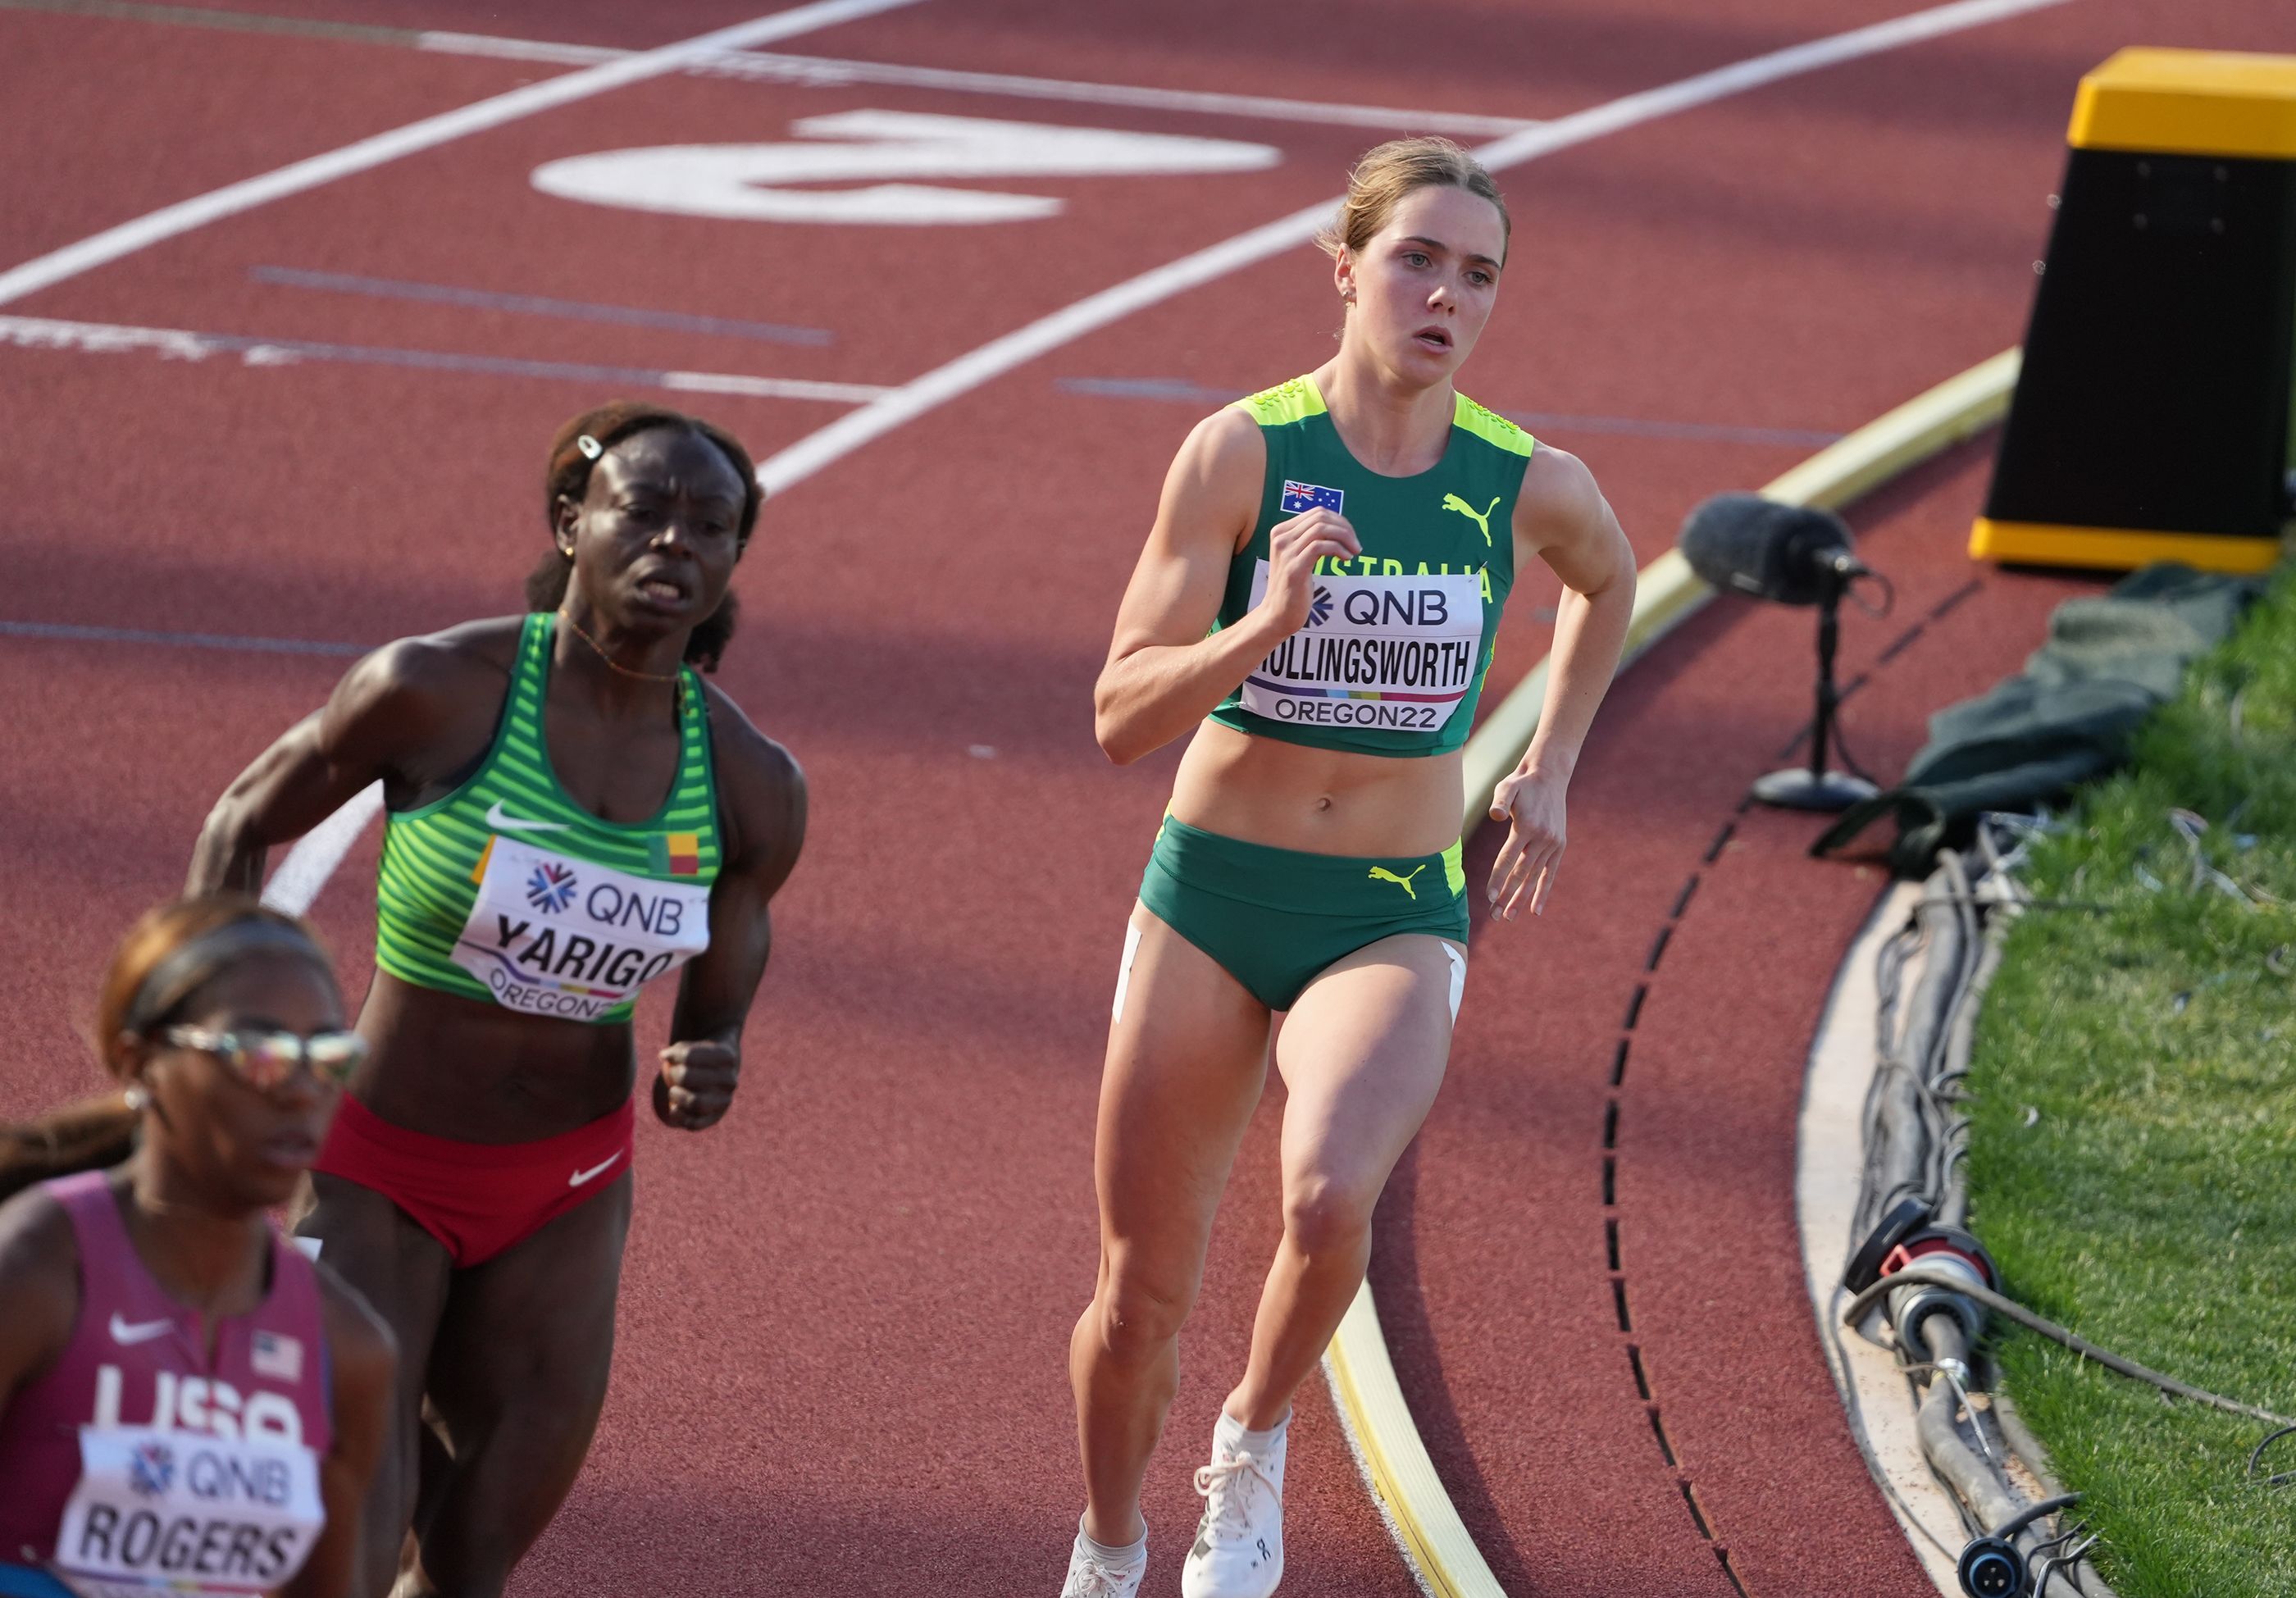 Claudia Hollingsworth in her 800m heat at the World Athletics Championships Oregon22